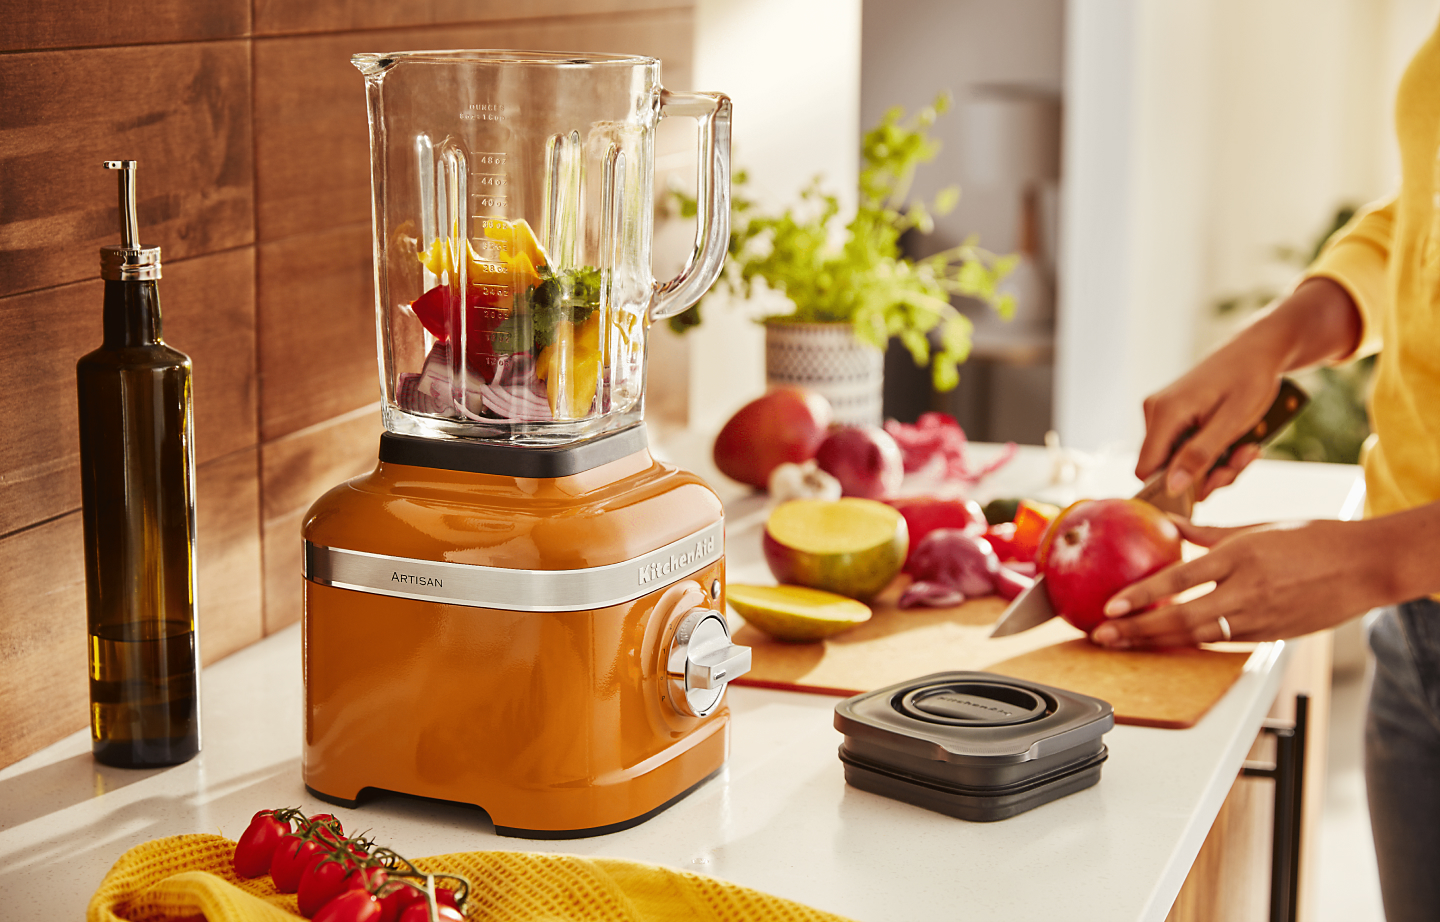 Make Soups, Smoothies, Sauces and More With a Blender That Cooks and Cleans  for You